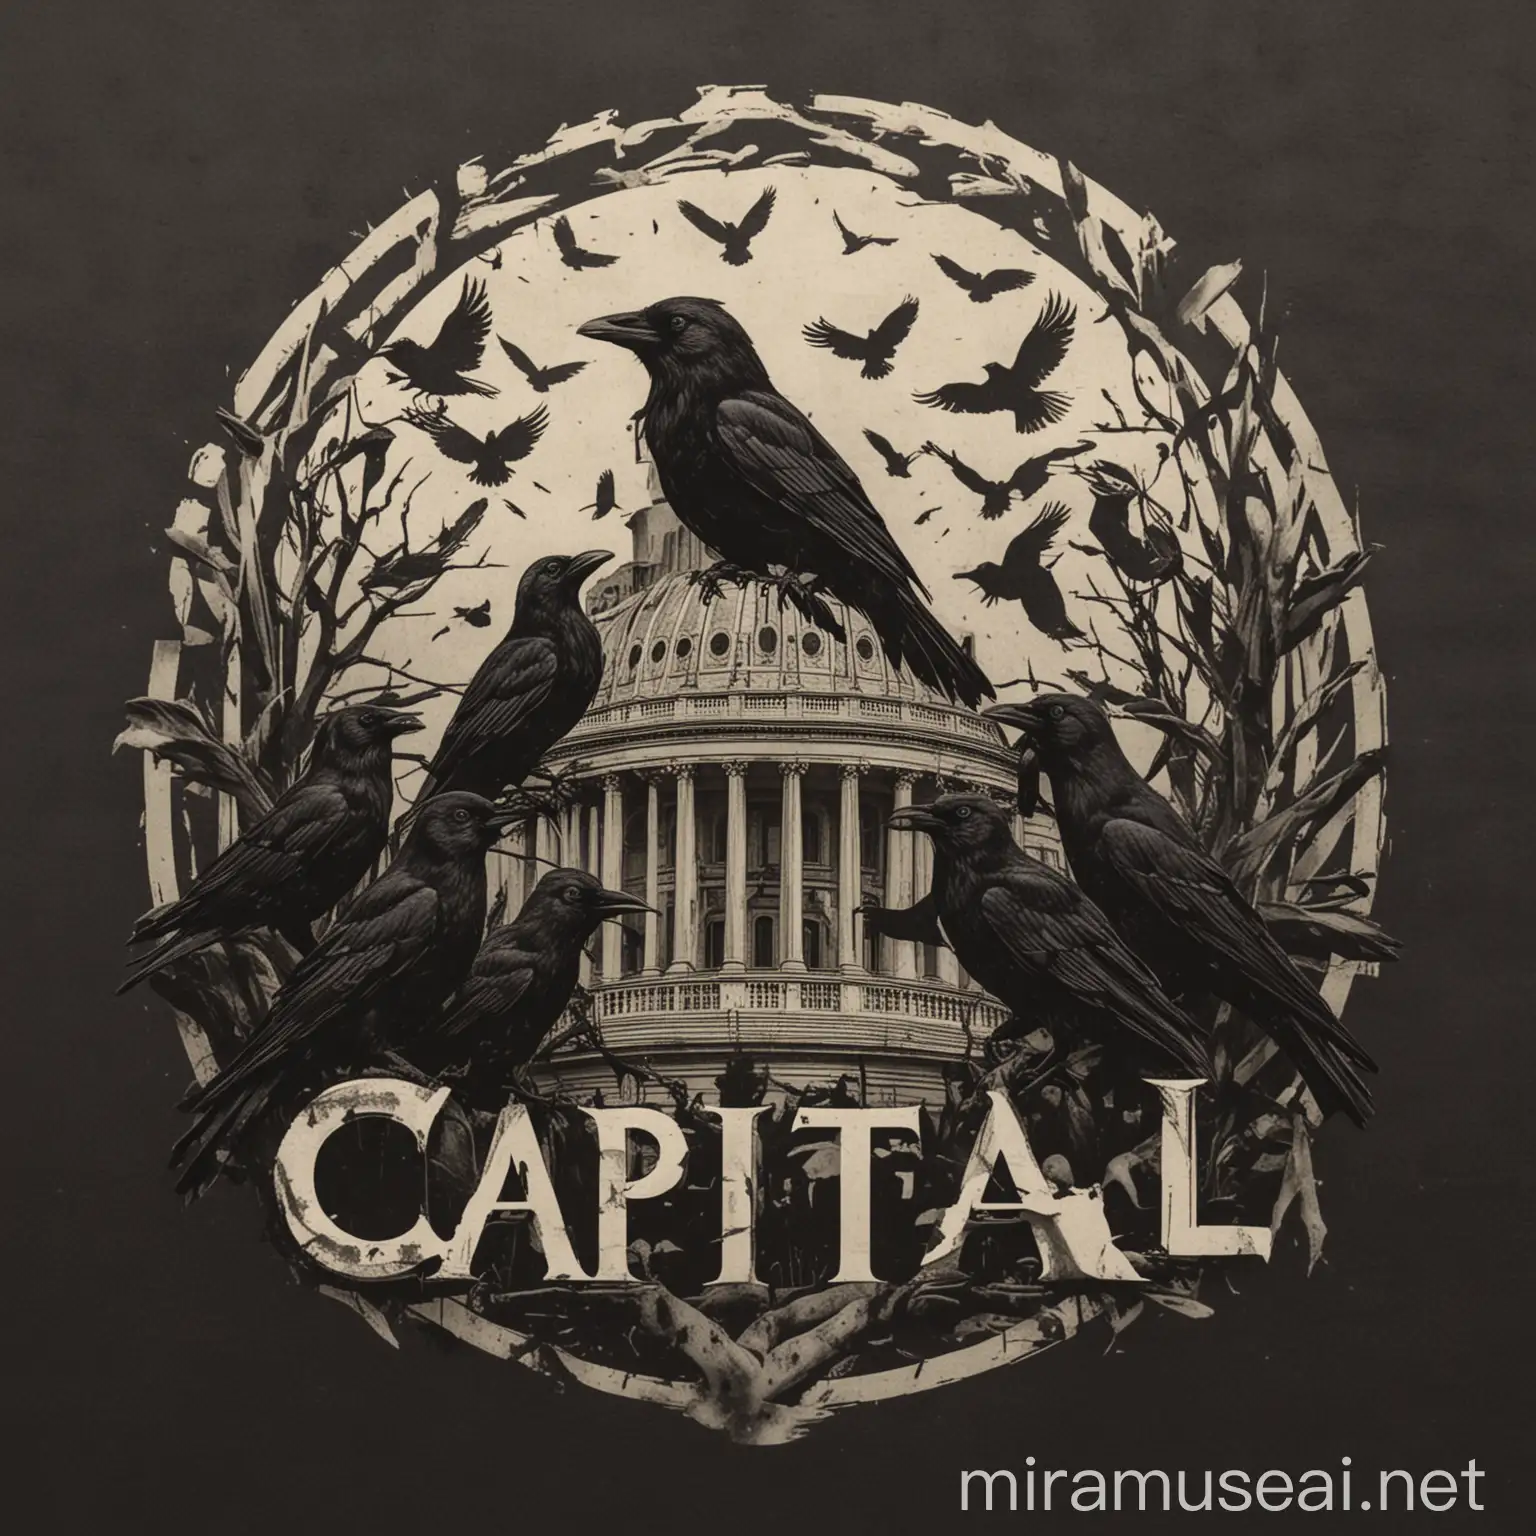 Capital logo with crows